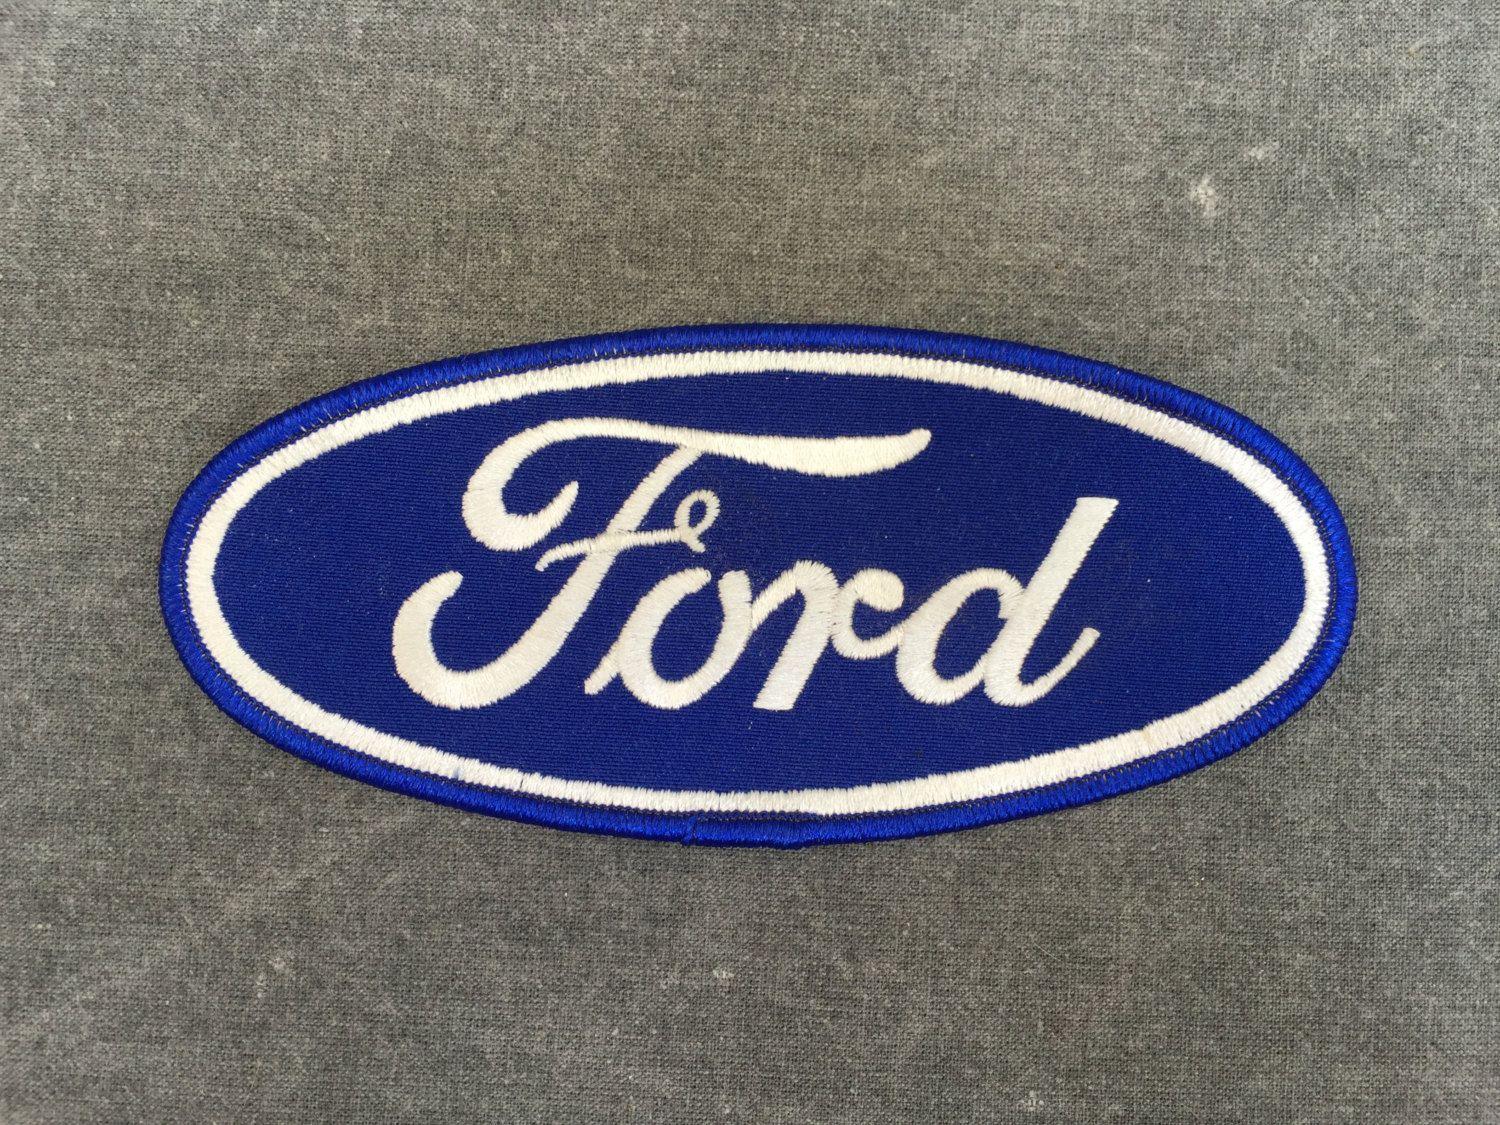 Navy Blue Oval Logo - Vintage Ford Patch - Navy Blue with White Embroidered Oval Fabric ...